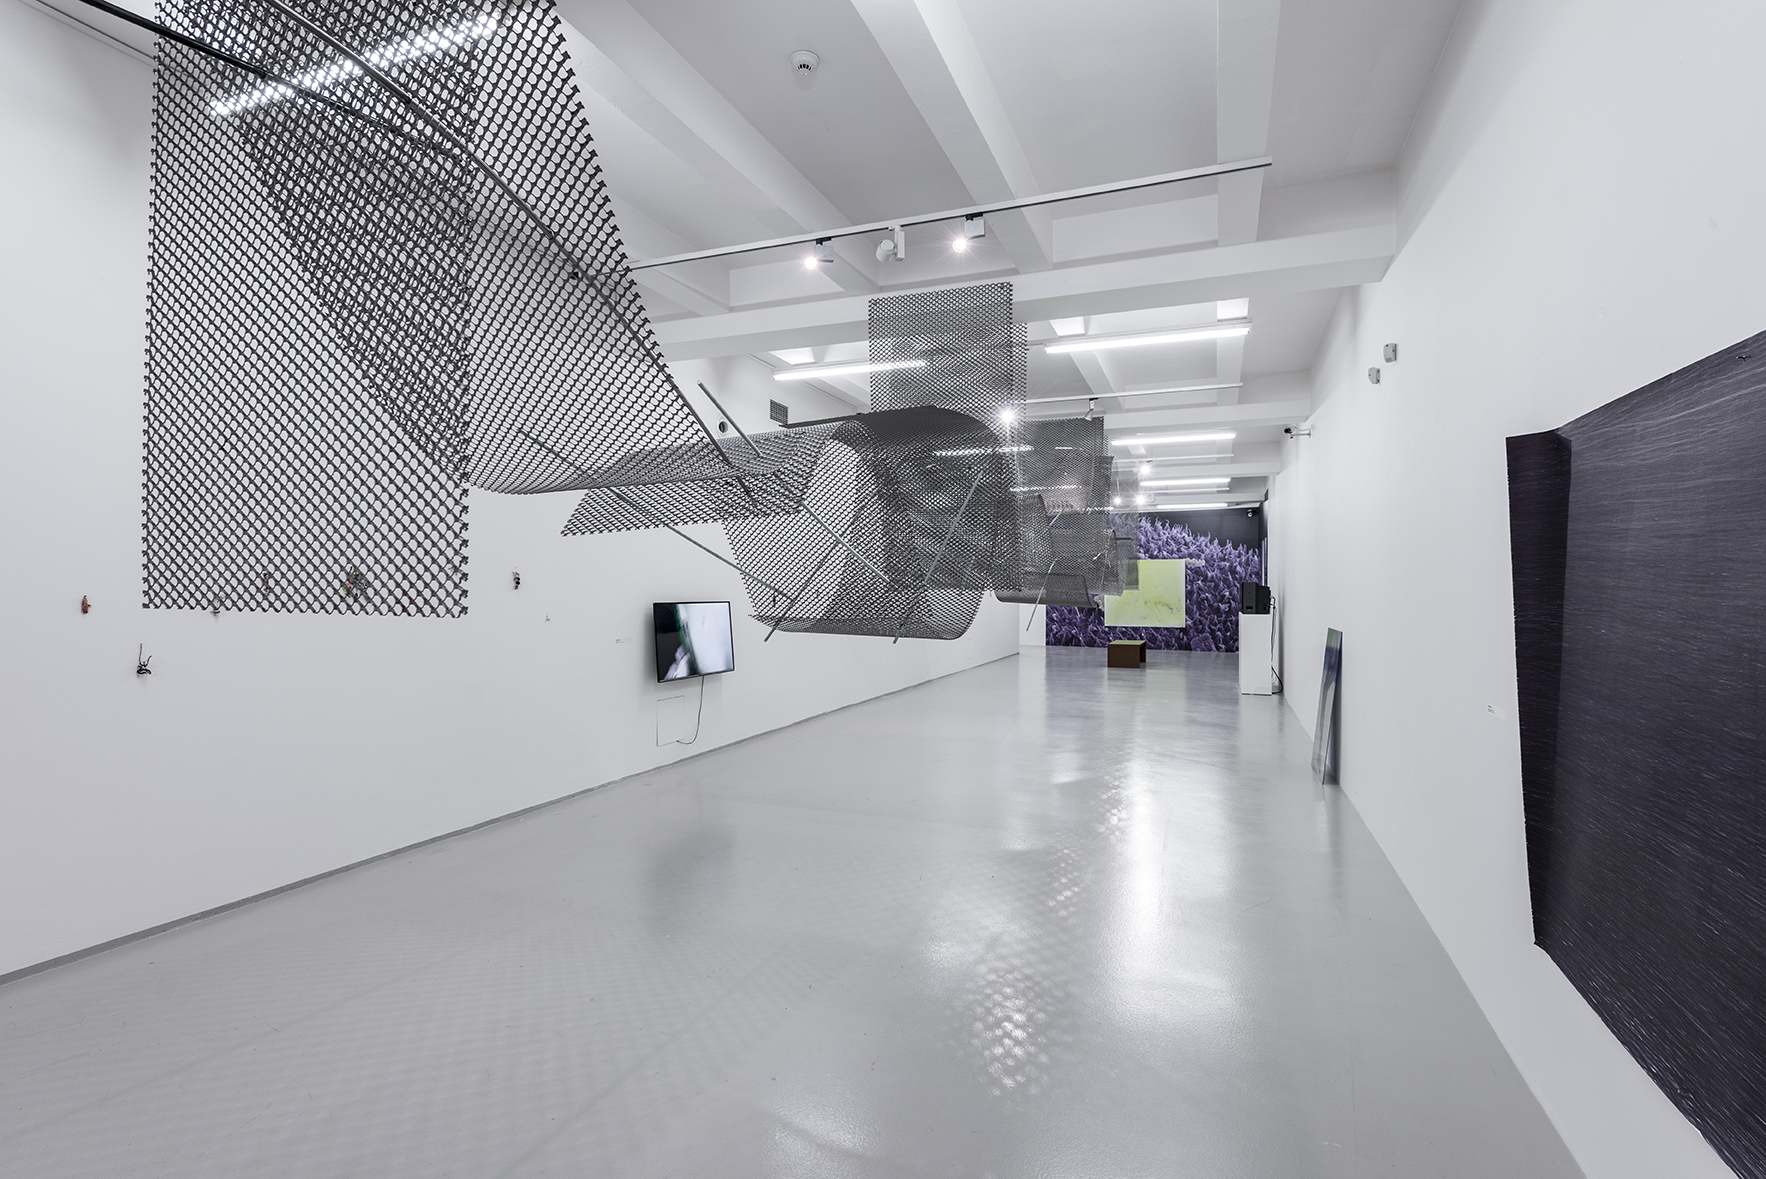 Pole Jam.<br/>1 x 2m sheets of stainless steel expanded mesh and galvanised threaded poles. <br/>Overall dimensions 1 x 2 x 15m. <br/>DOX Gallery Prague <br/>2018 